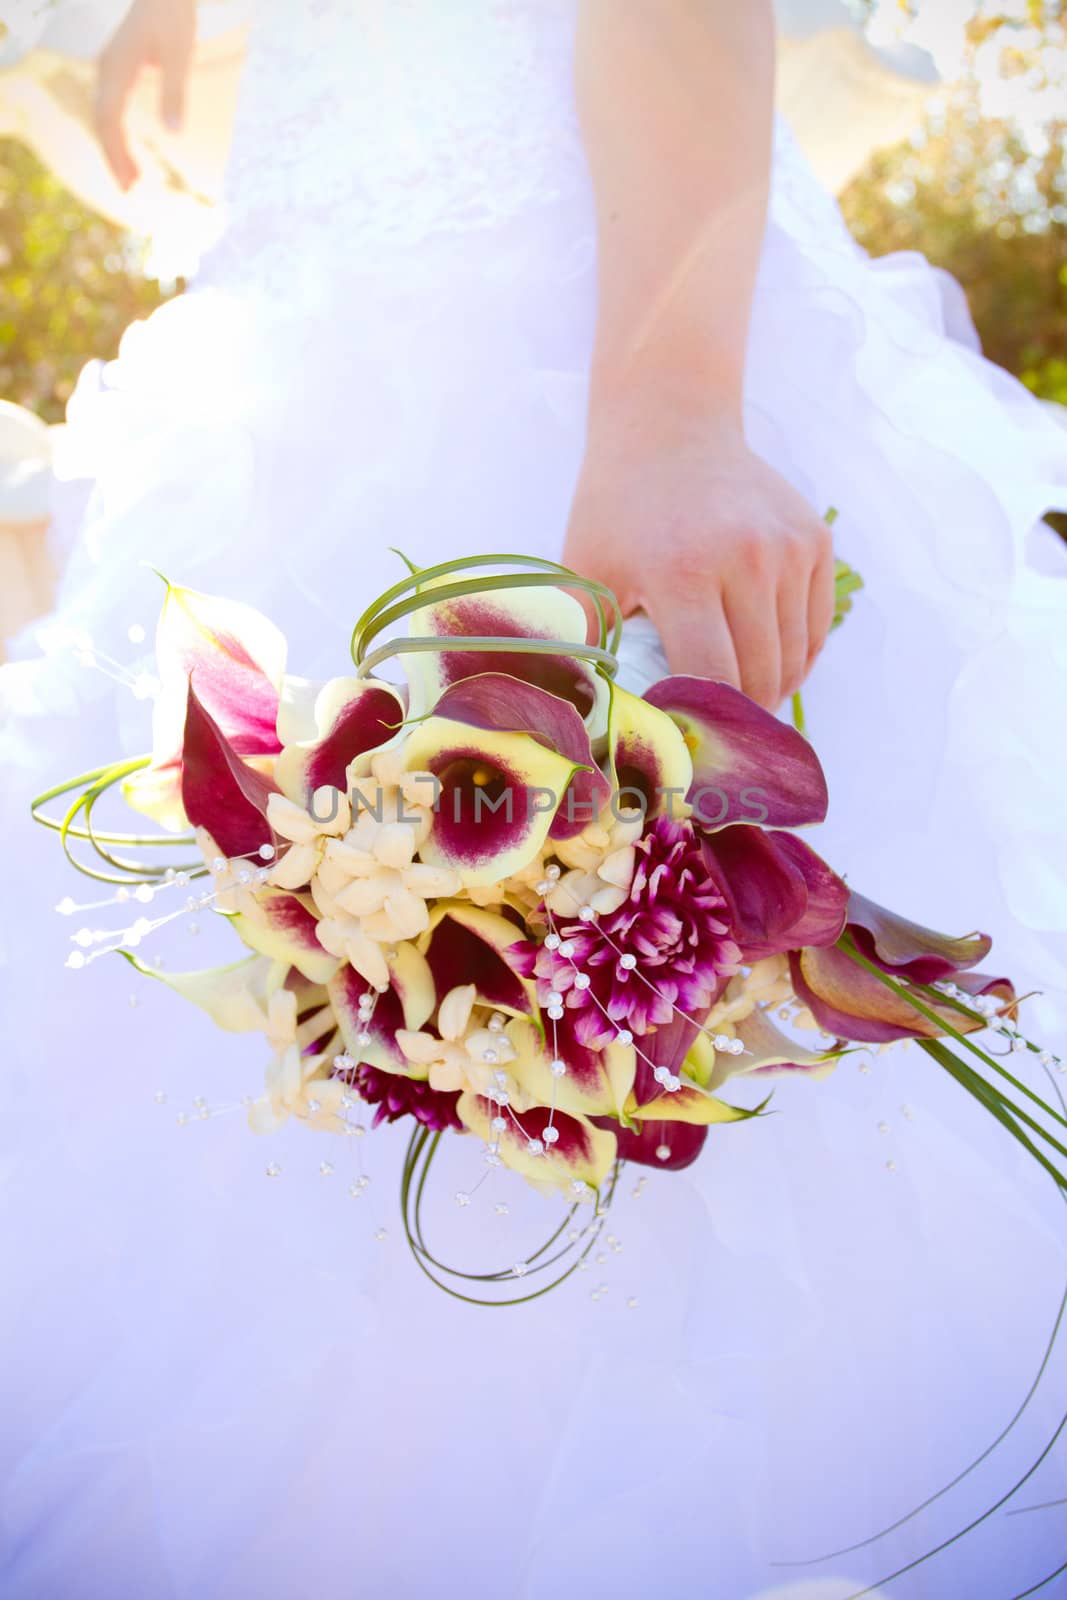 A beautiful bride in her white wedding dress holds her bouquet of flowers on her wedding day.